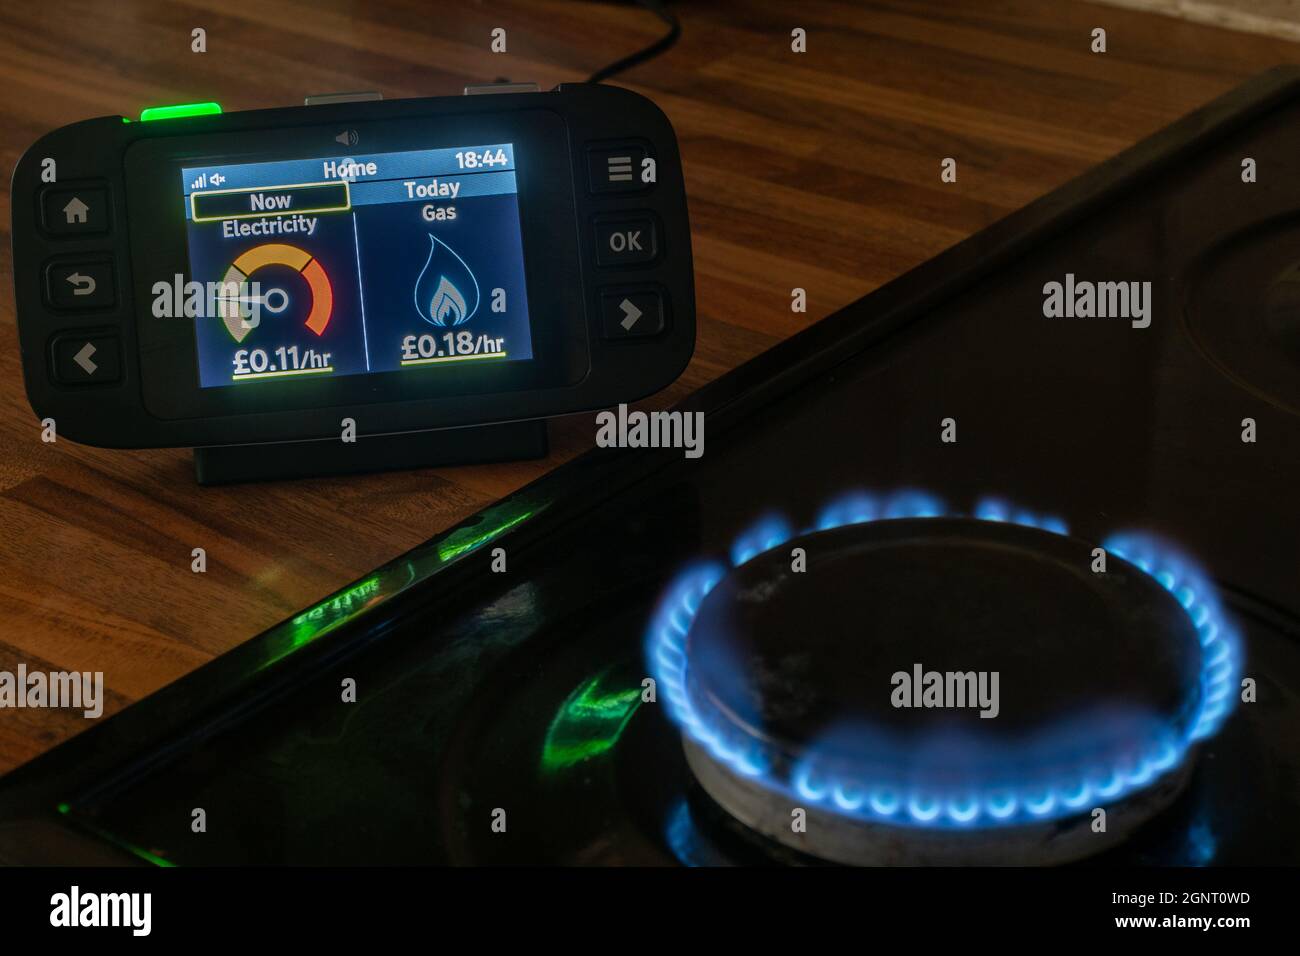 Smart meter readings of gas and electricity usage on a home smart energy monitor next to cooker with gas hob flame Stock Photo